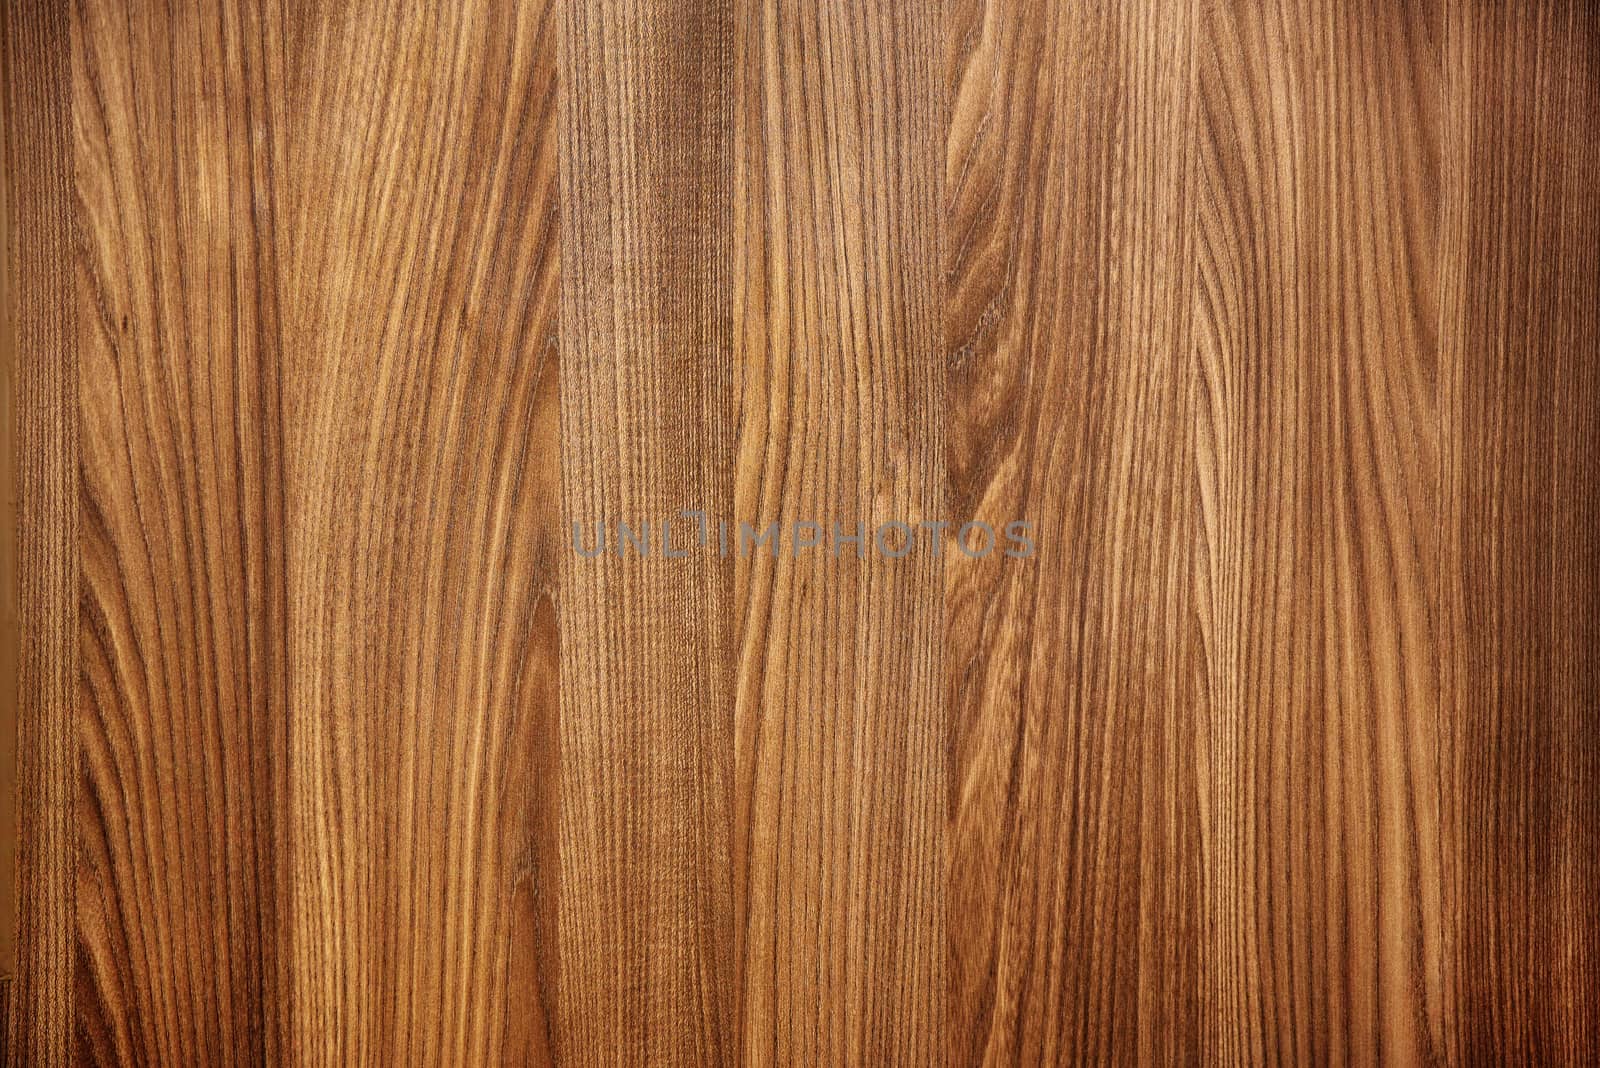 Brown wood texture background blank for design